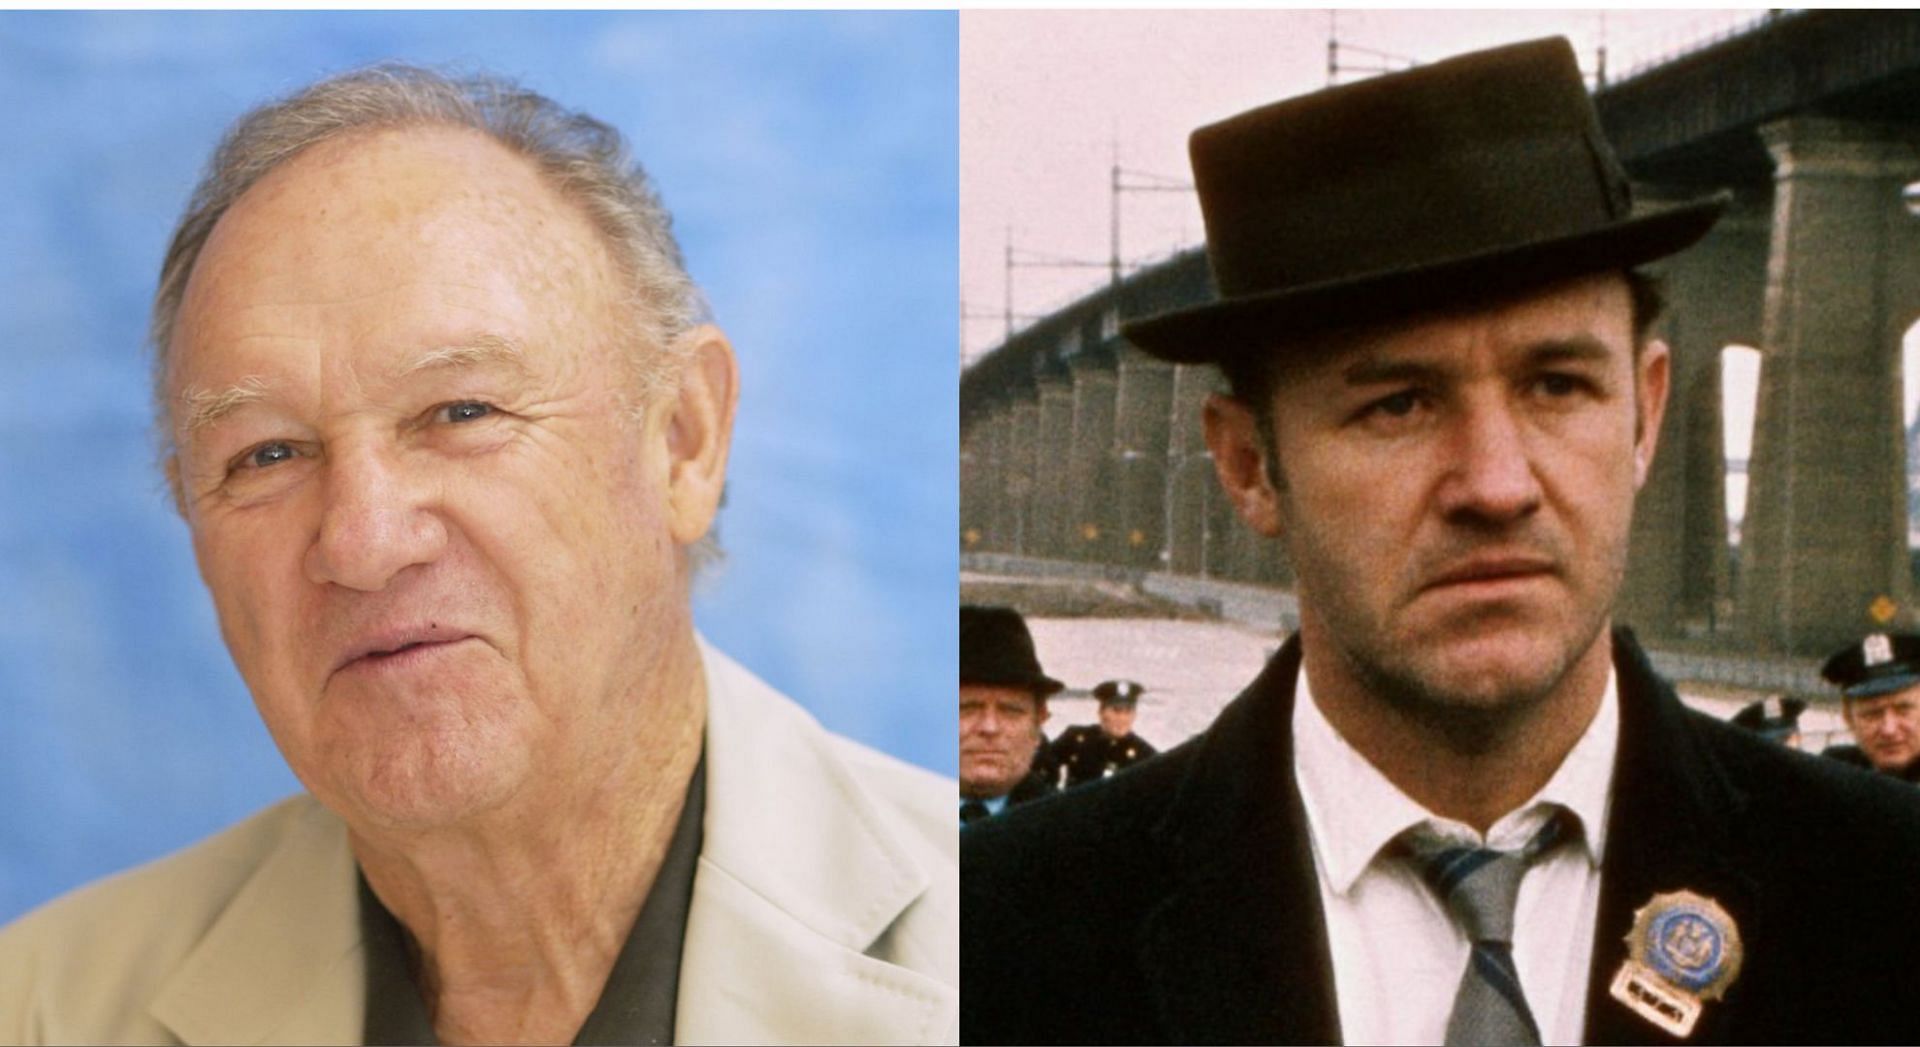 Hollywood legend Gene Hackman was recently spotted in public in rare Mexico sighting (Image via Getty Images)